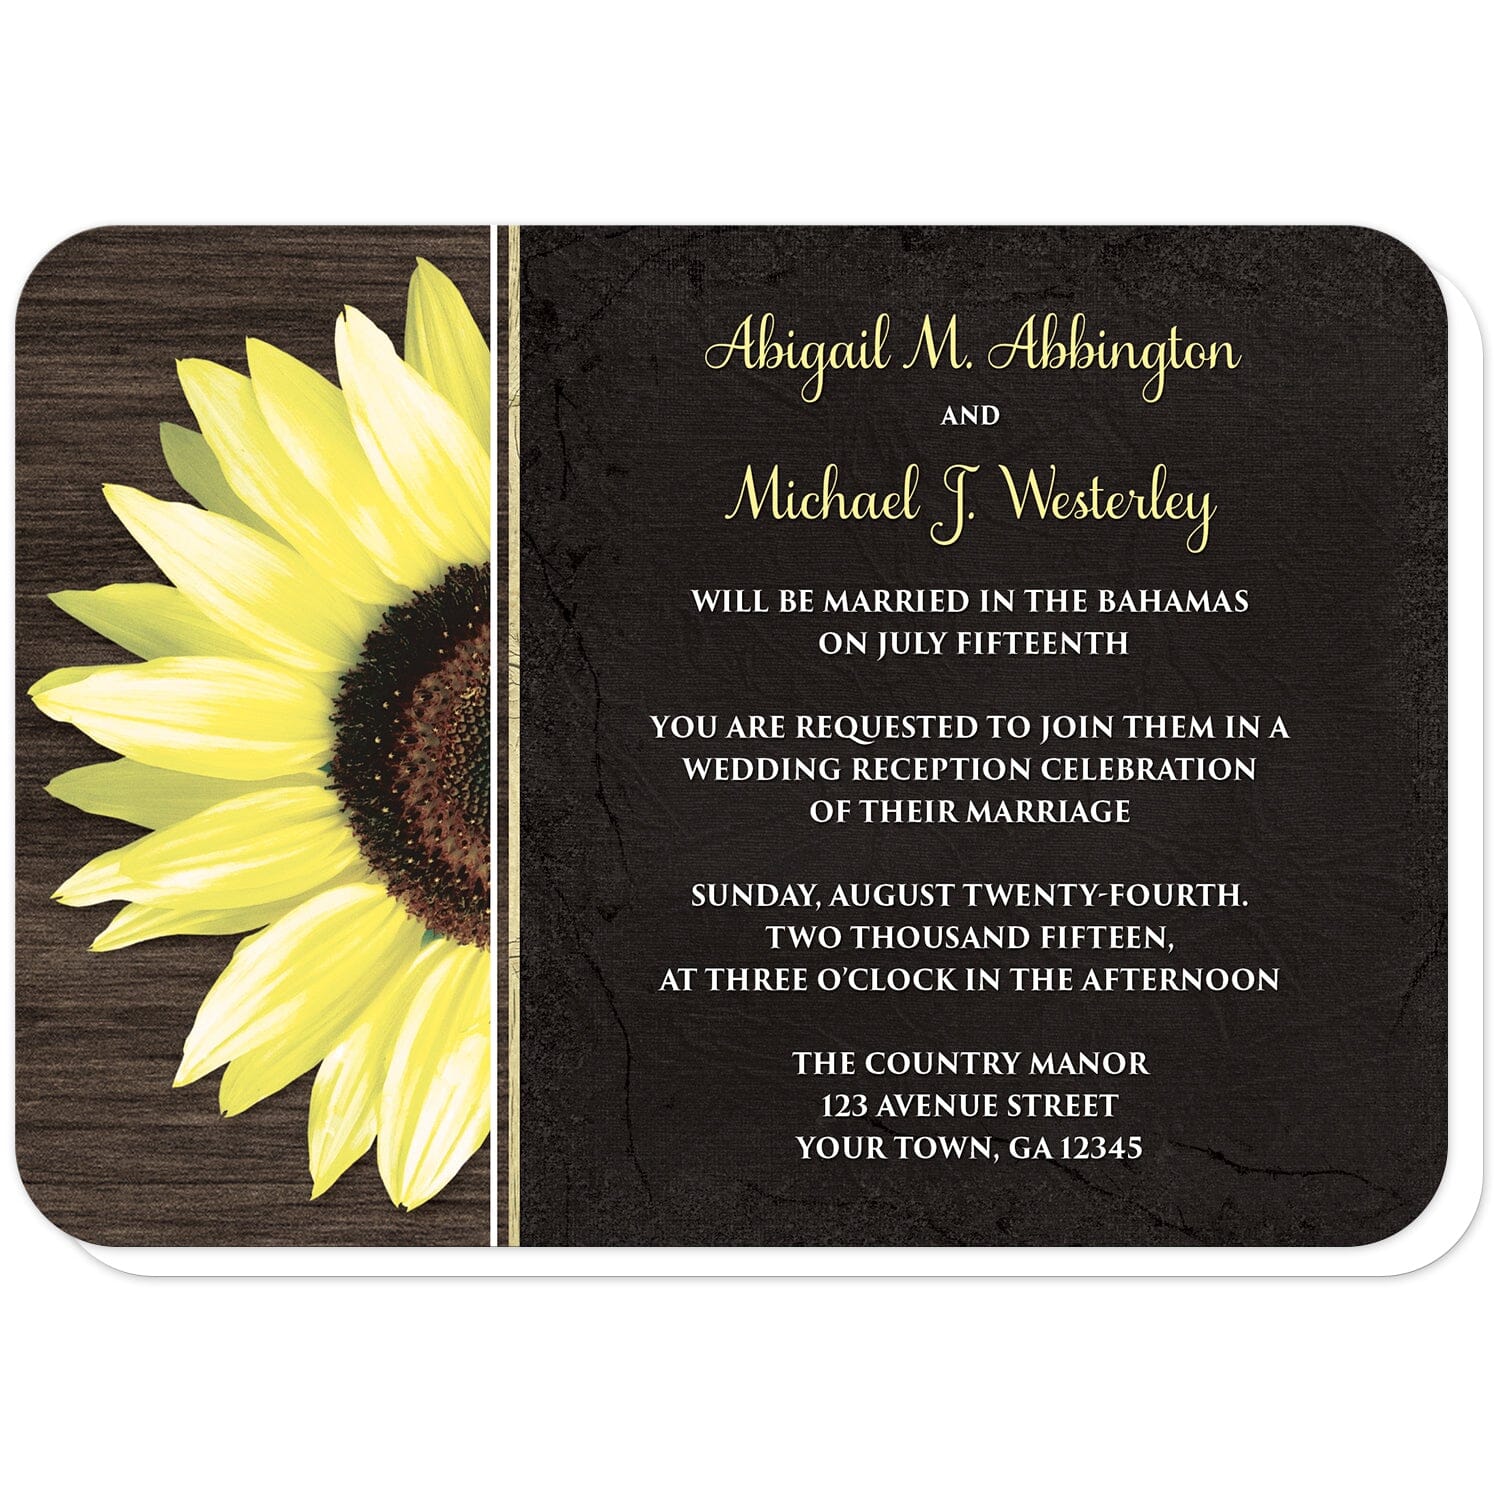 Rustic Sunflower with Black Reception Only Invitations (with rounded corners) at Artistically Invited. Country-inspired rustic sunflower with black reception only invitations featuring a vibrant bright yellow sunflower over a textured dark brown wood design along the left side. Your personalized post-wedding reception details are custom printed in yellow and white over a tattered black cloth illustration to the right of the sunflower.